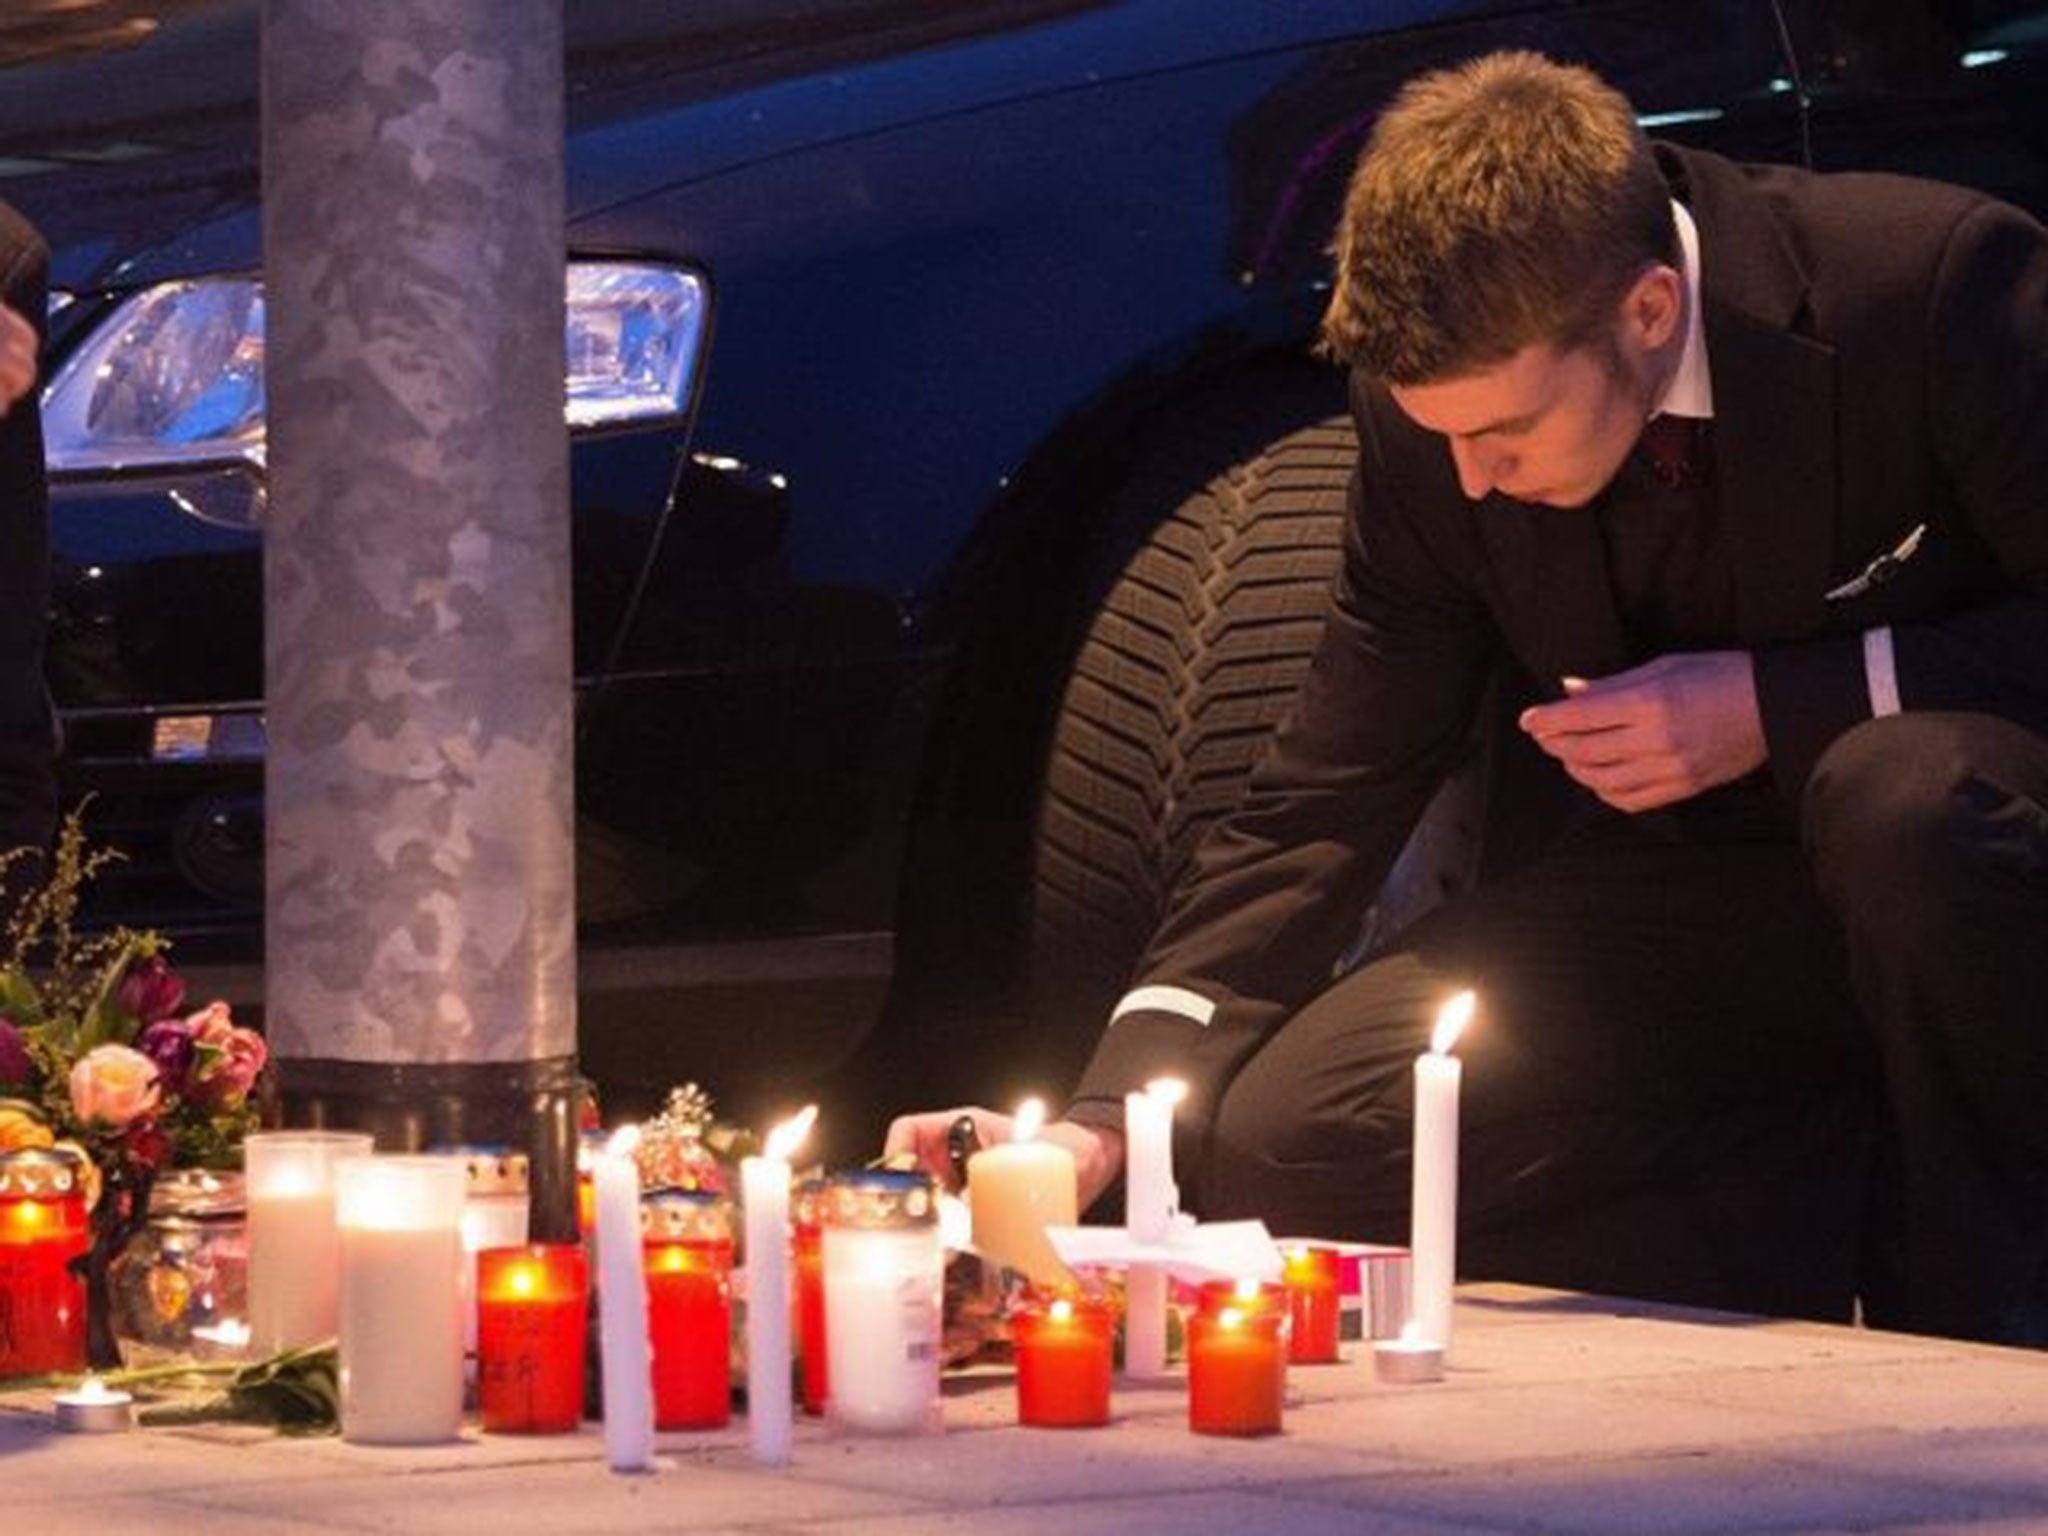 An employee of Germanwings and Lufthansa lay flowers and candles outside the headquarters of Germanwings in Cologne, Germany, 24 March 2015. (Image: EPA/Marius Becker)